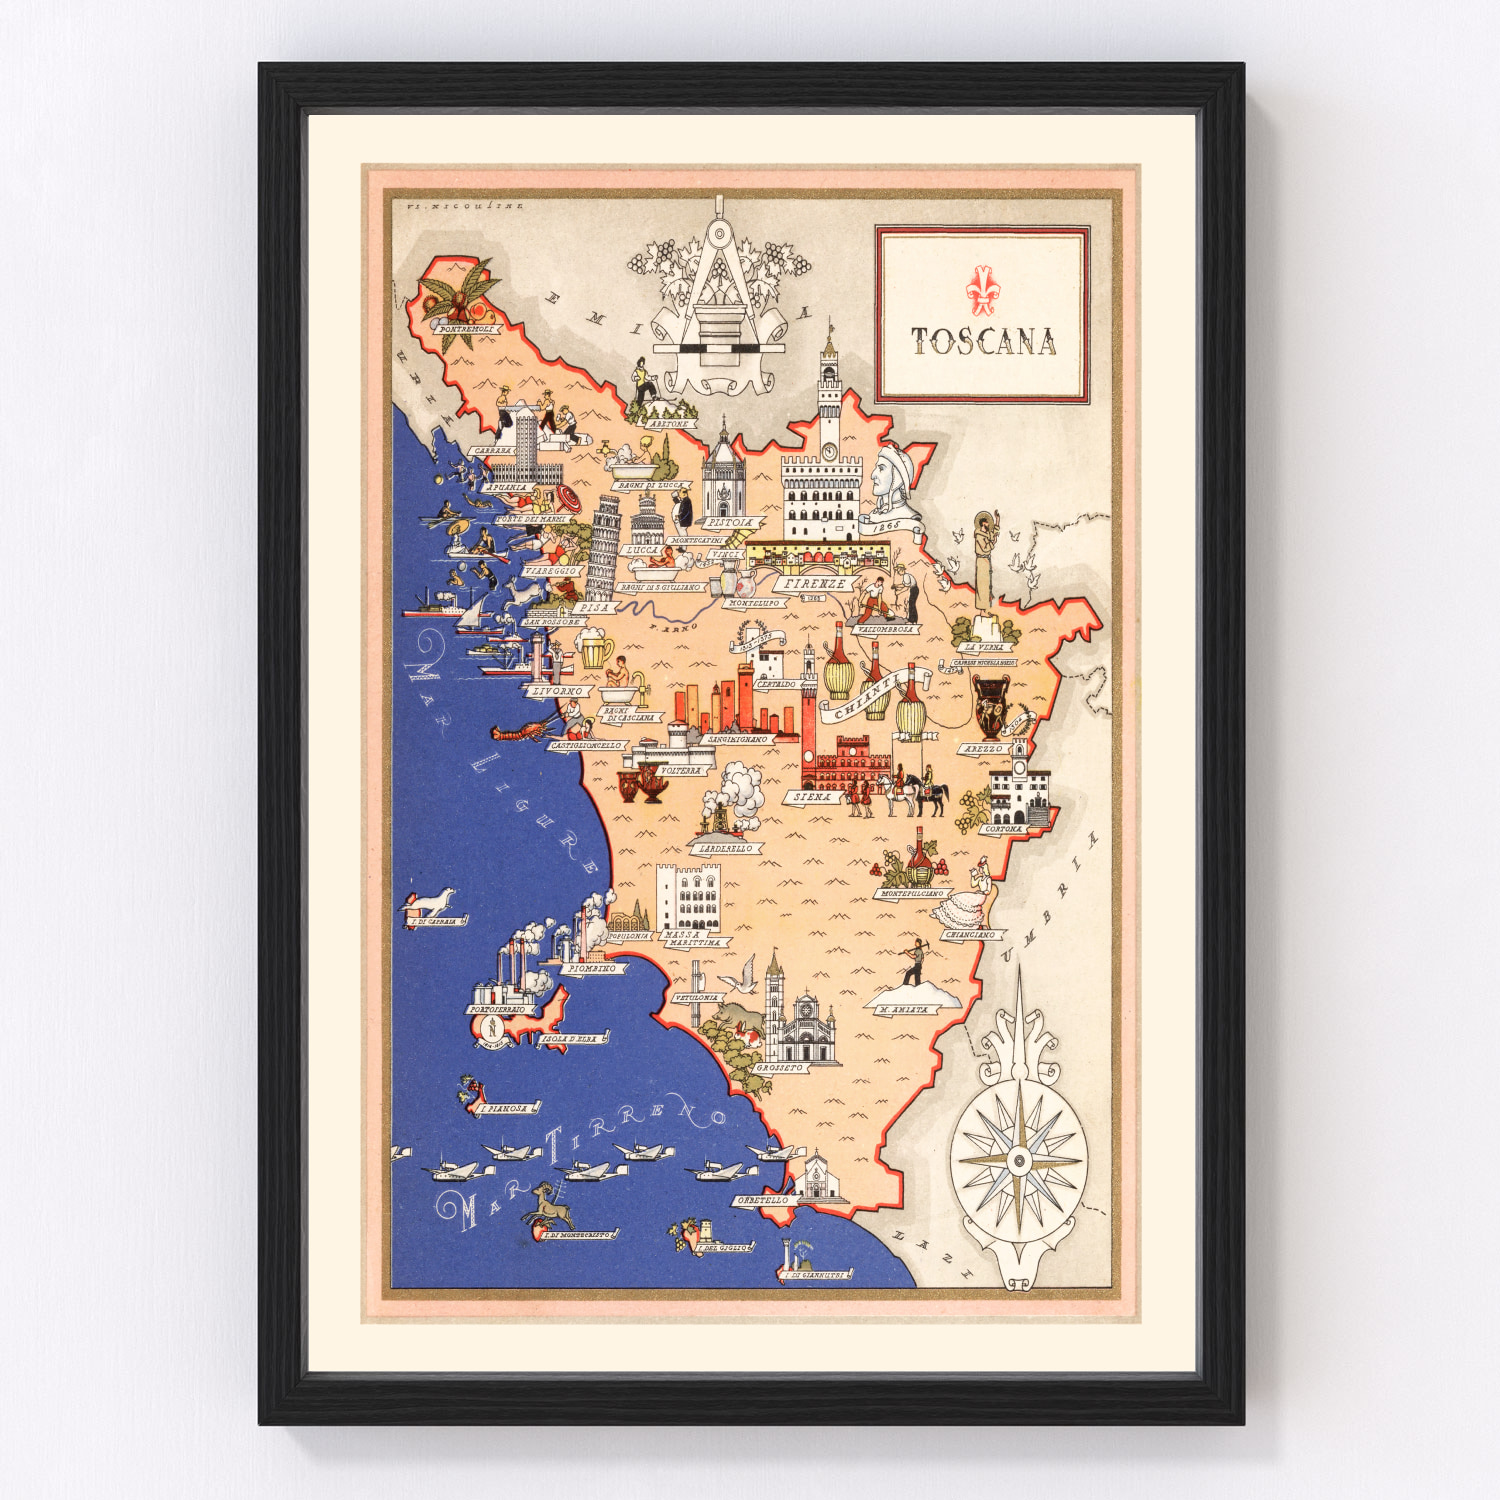 Vintage Map of Tuscany Italy, 1938 by Ted's Vintage Art